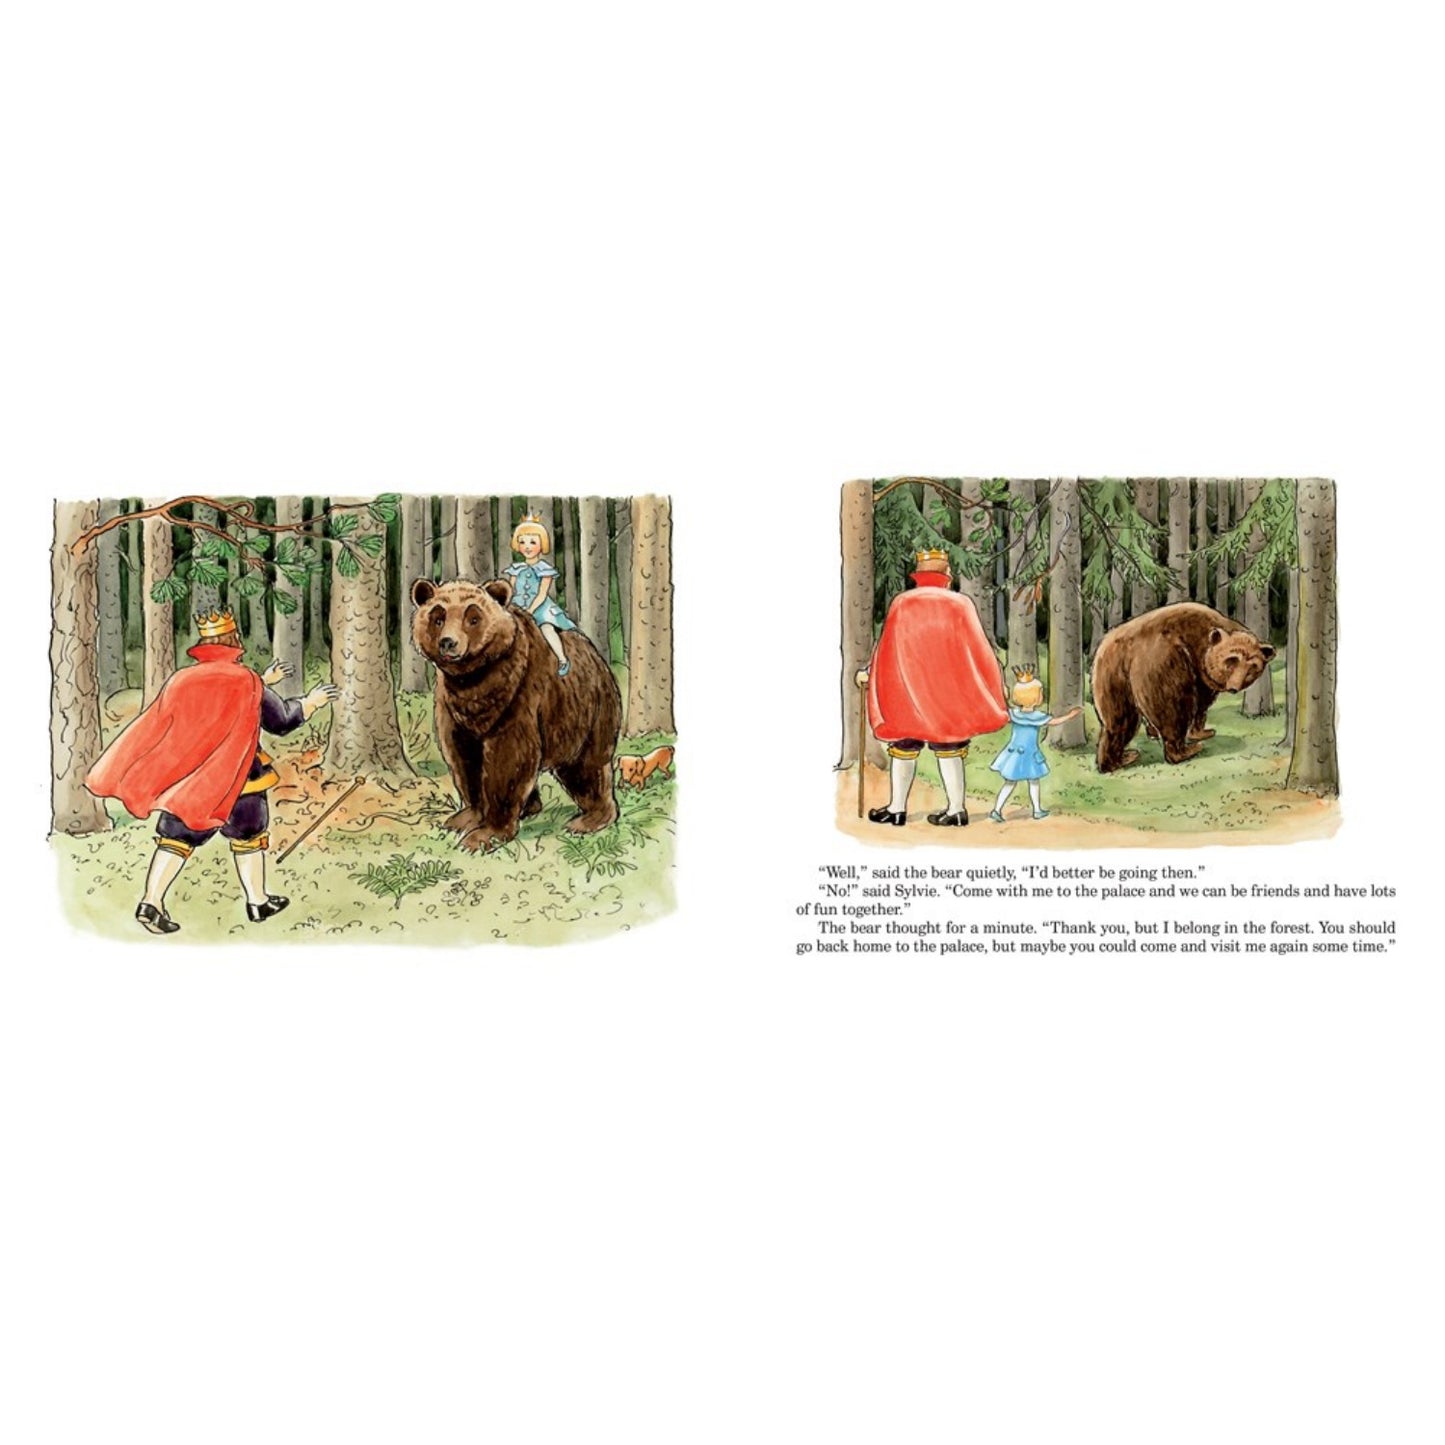 An Elsa Beskow Gift Collection: Children of the Forest and other Beautiful Books